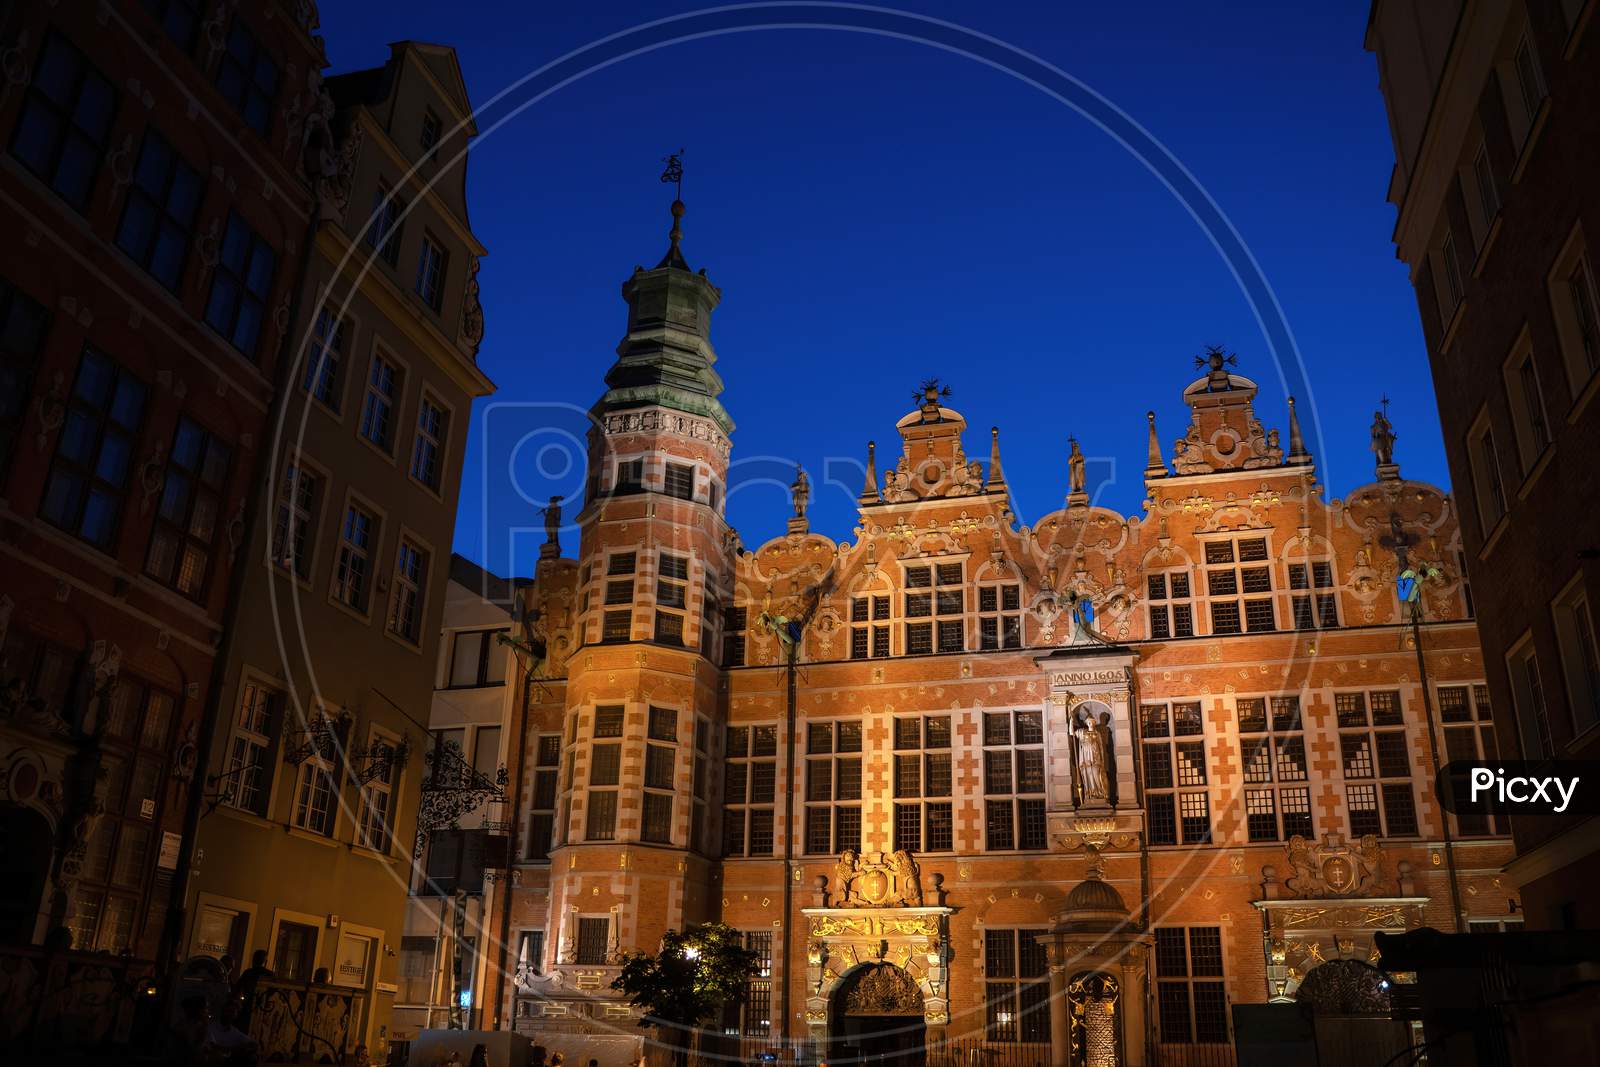 Gdansk, North Poland - August 13, 2020: Wide Angle Night Shot Of A Long Lane Street In Old Town Displaying Polish Architecture Against Clear Blue Night Sky